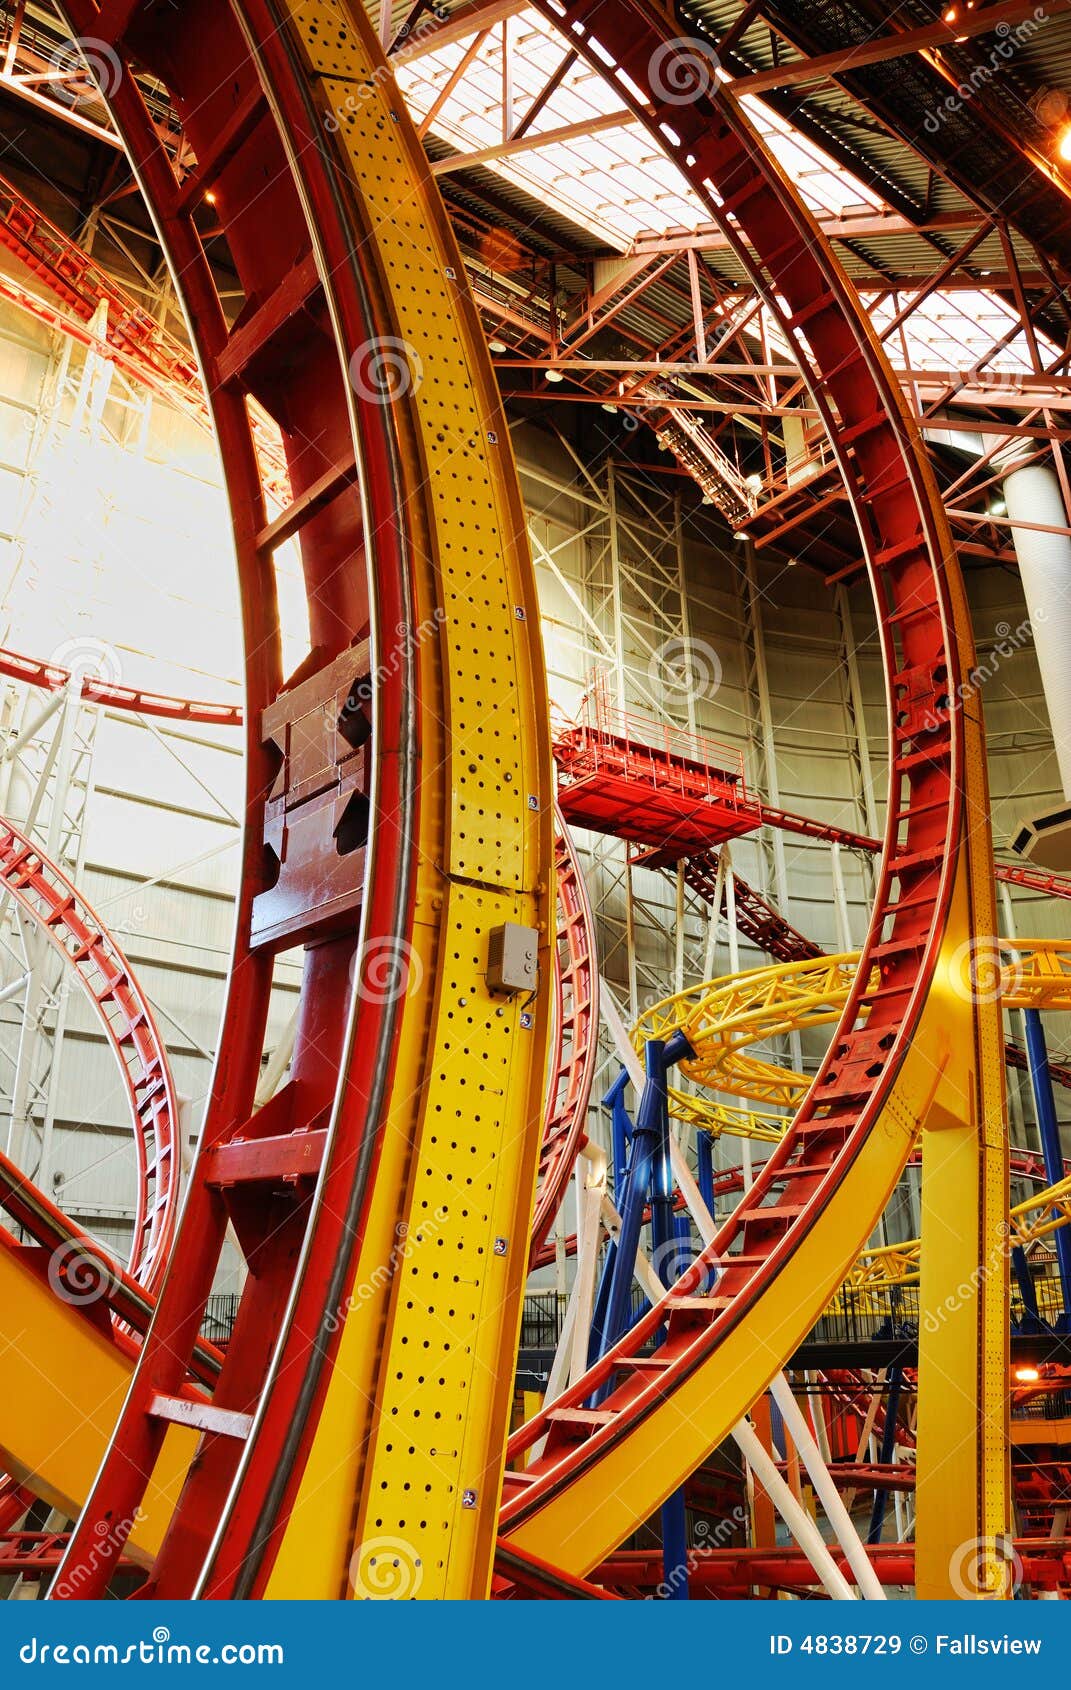 Rollercoaster Tracks In West Edmonton Mall Stock Image Image Of Enjoyment Canada